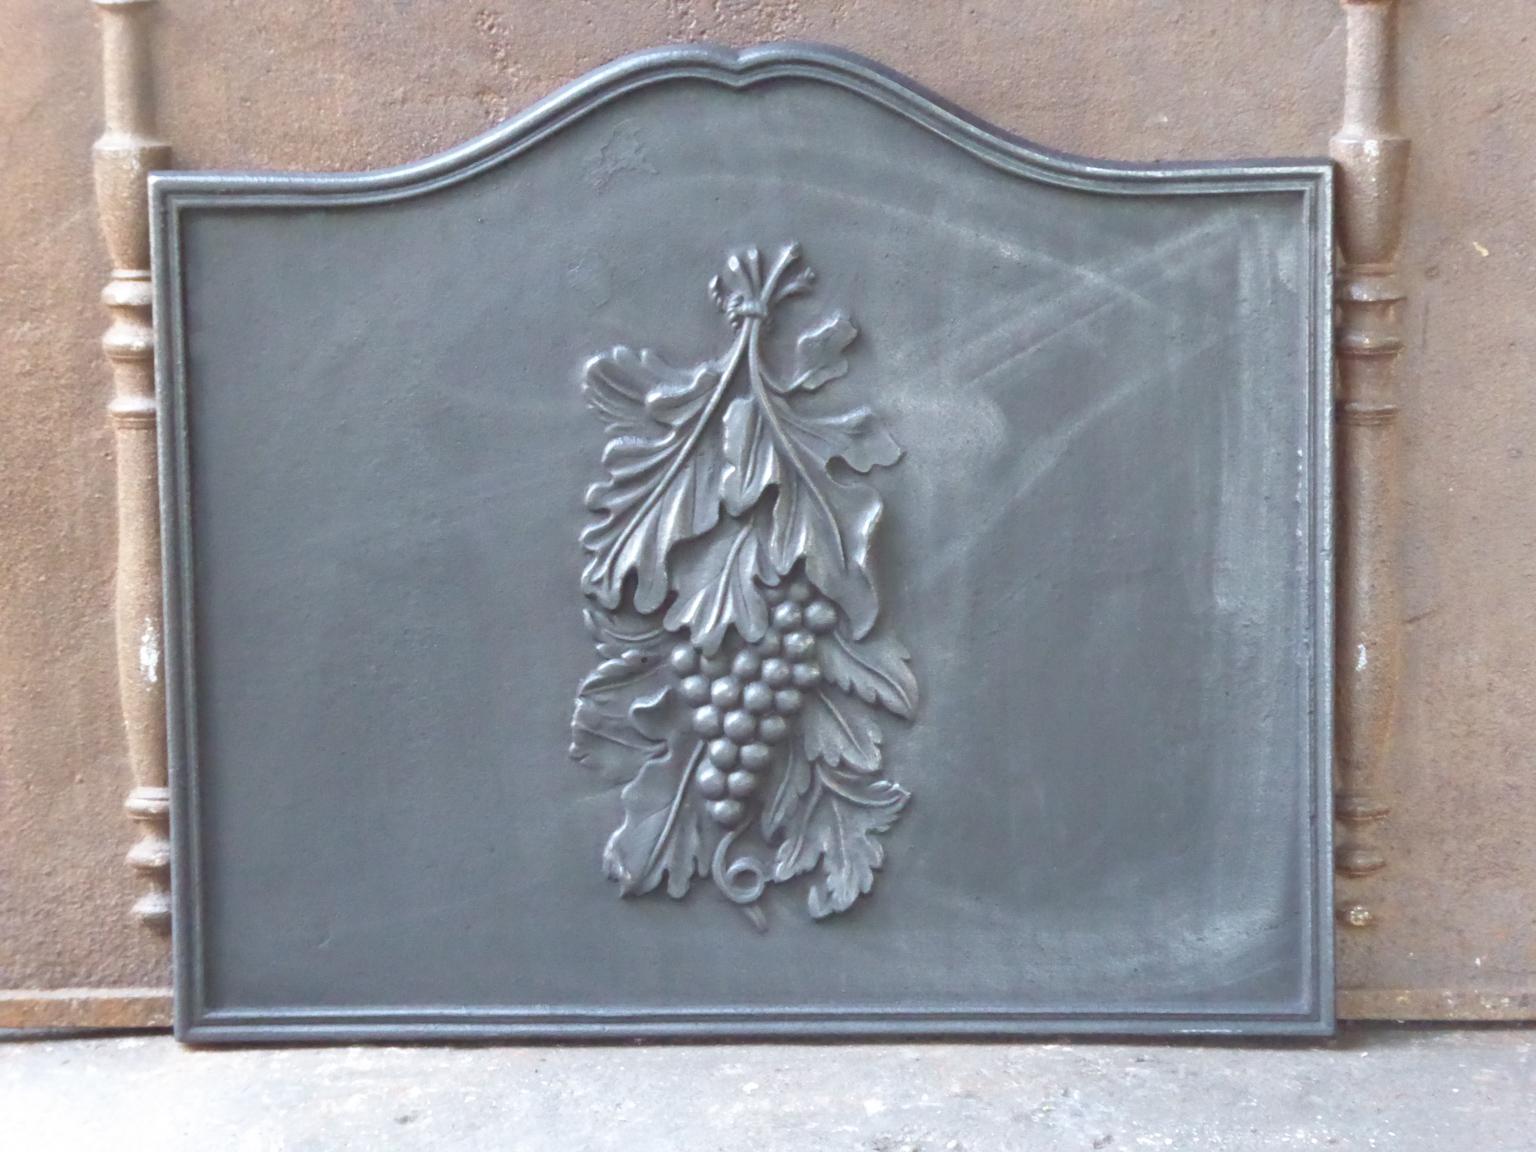 20th century French modernist fireback with a vine with grapes. 

The fireback is made of cast iron and has a black / pewter patina. It is in a good condition, without cracks.